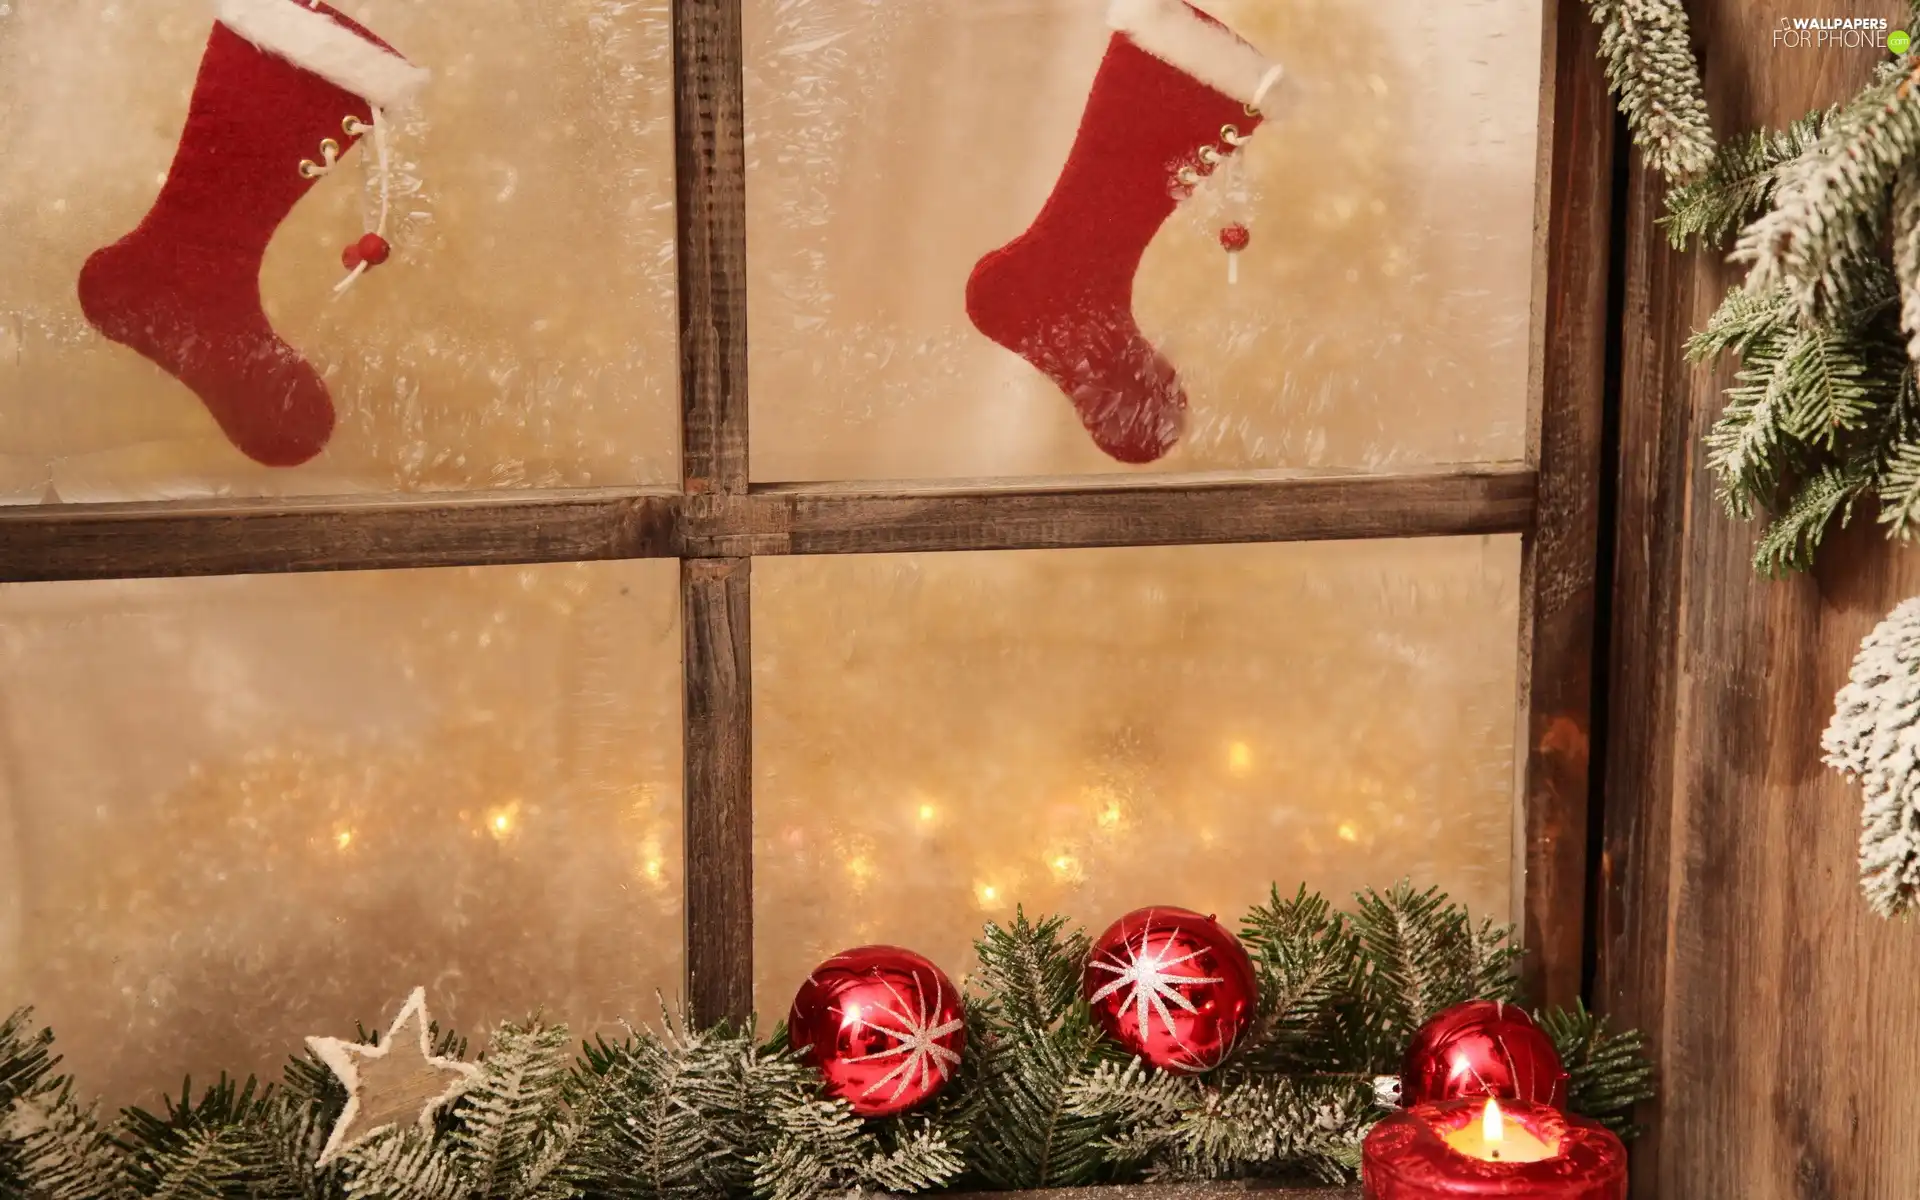 Candle, spruce, Red, socks, Window, baubles